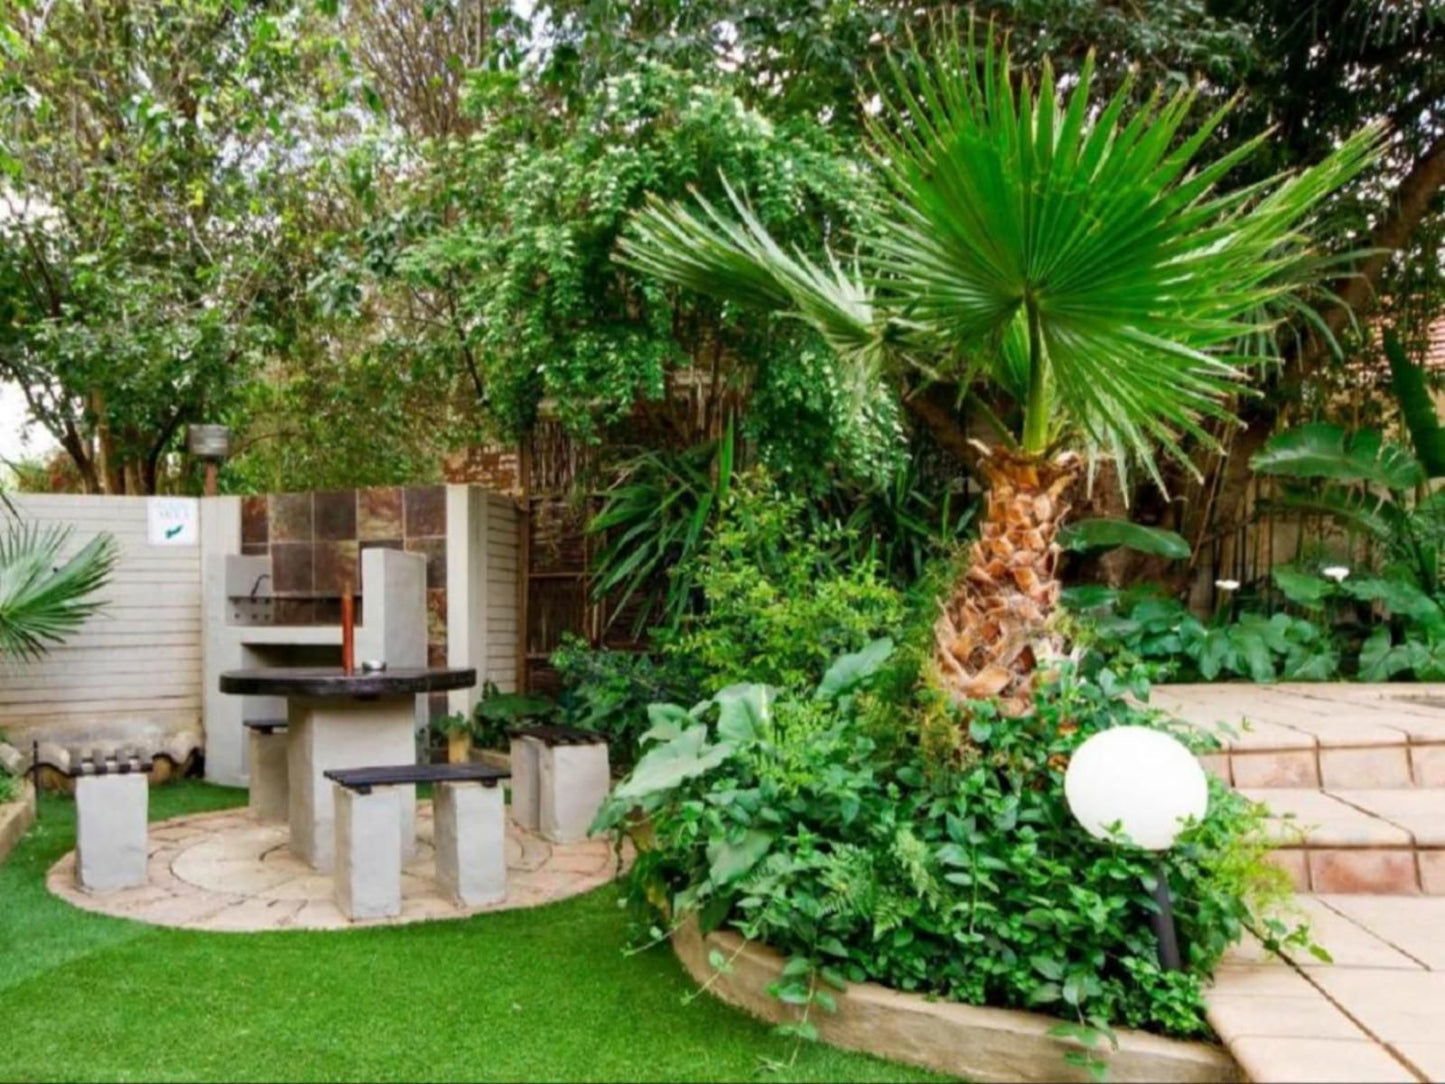 The Villa Guest House Bayswater Bloemfontein Free State South Africa Palm Tree, Plant, Nature, Wood, Garden